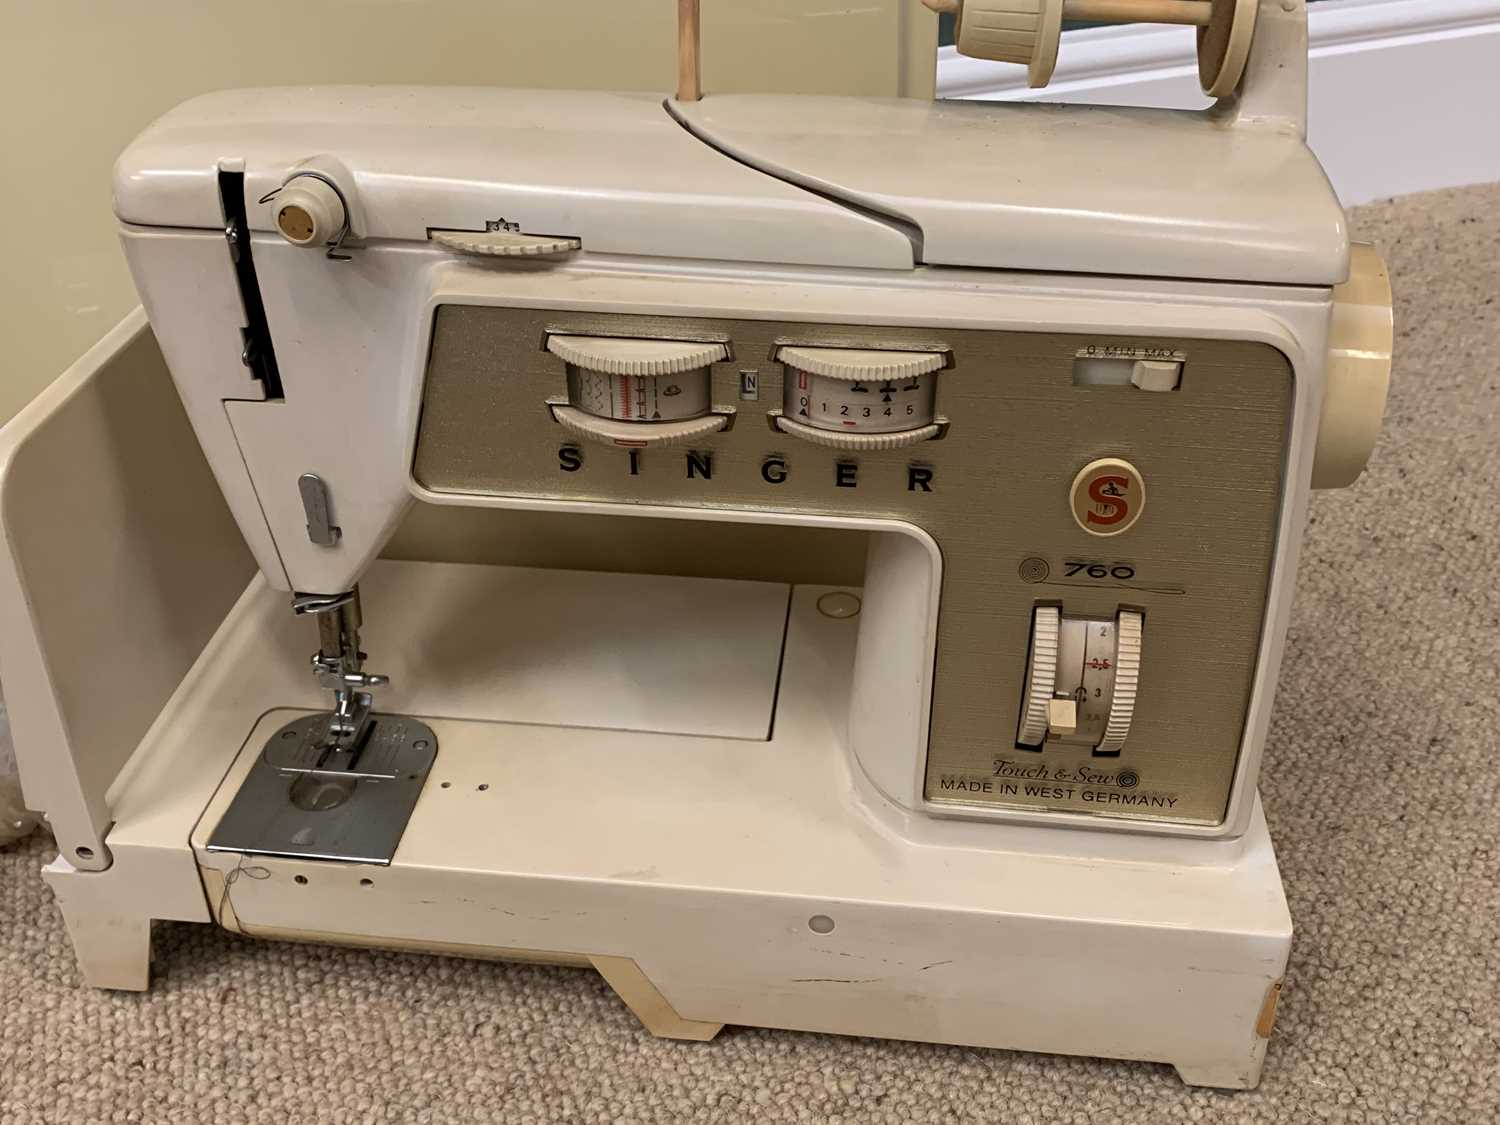 SINGER 760 'TOUCH & SEW' SEWING MACHINE, in case and a Steepletone SMC595 hifi system with - Image 2 of 3